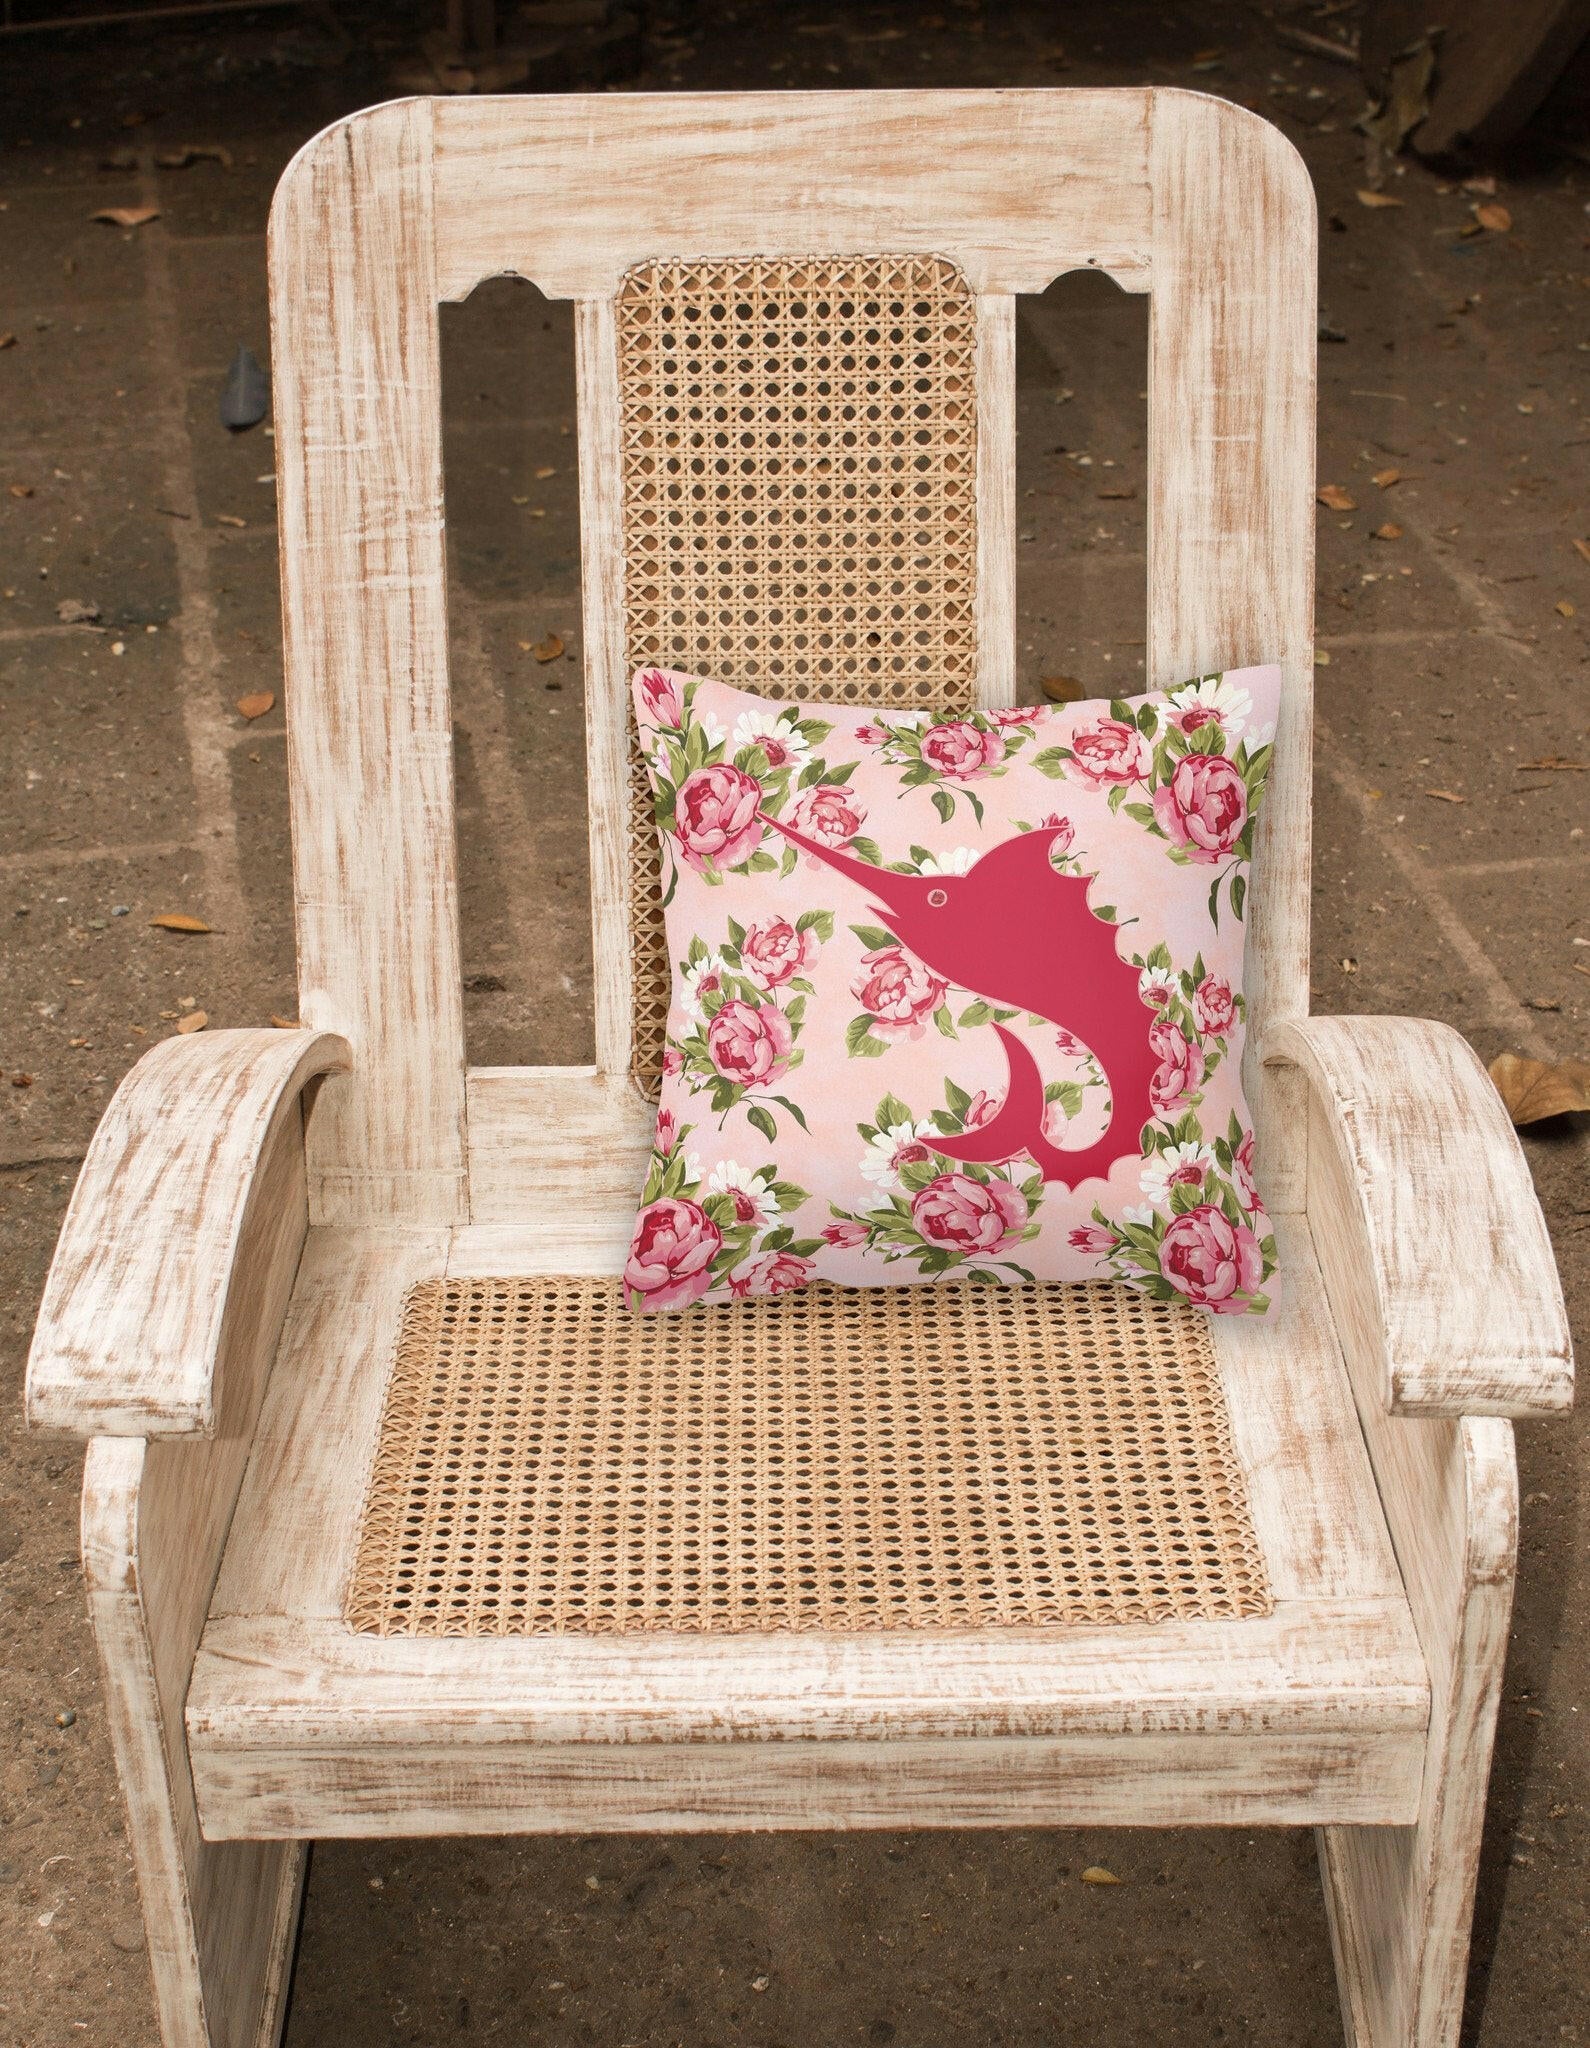 Fish - Sword Fish Shabby Chic Pink Roses  Fabric Decorative Pillow BB1097-RS-PK-PW1414 - the-store.com